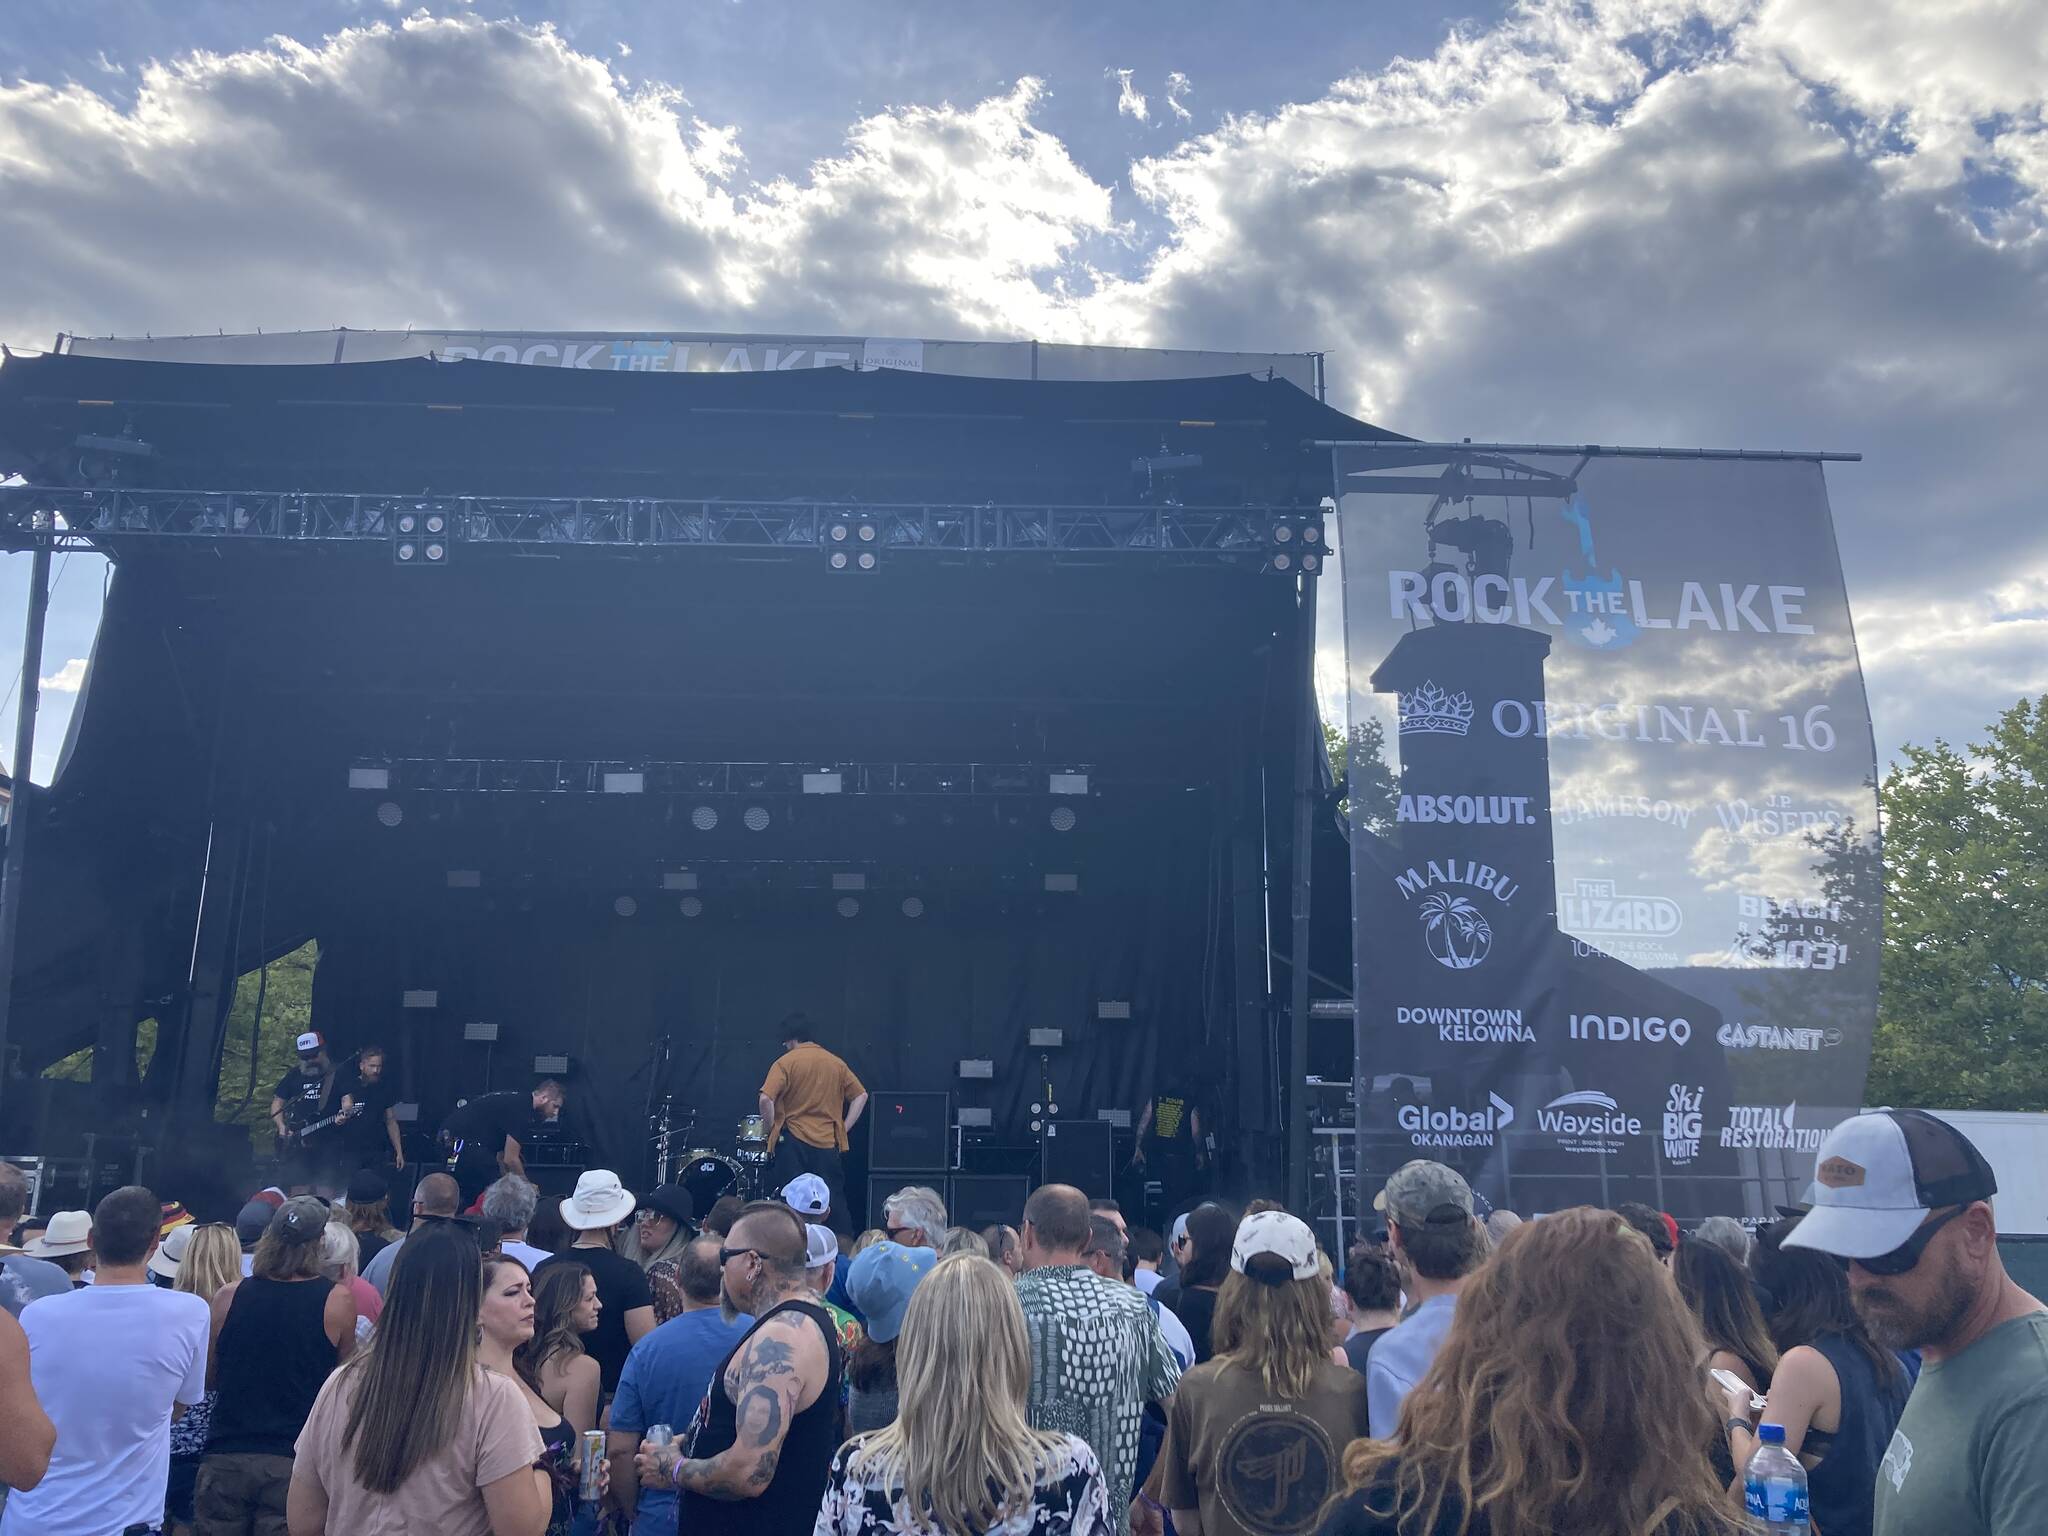 Thousands attended the Rock the Lake music festival over the weekend of Aug. 11-13. (Caity Henry/Capital News)